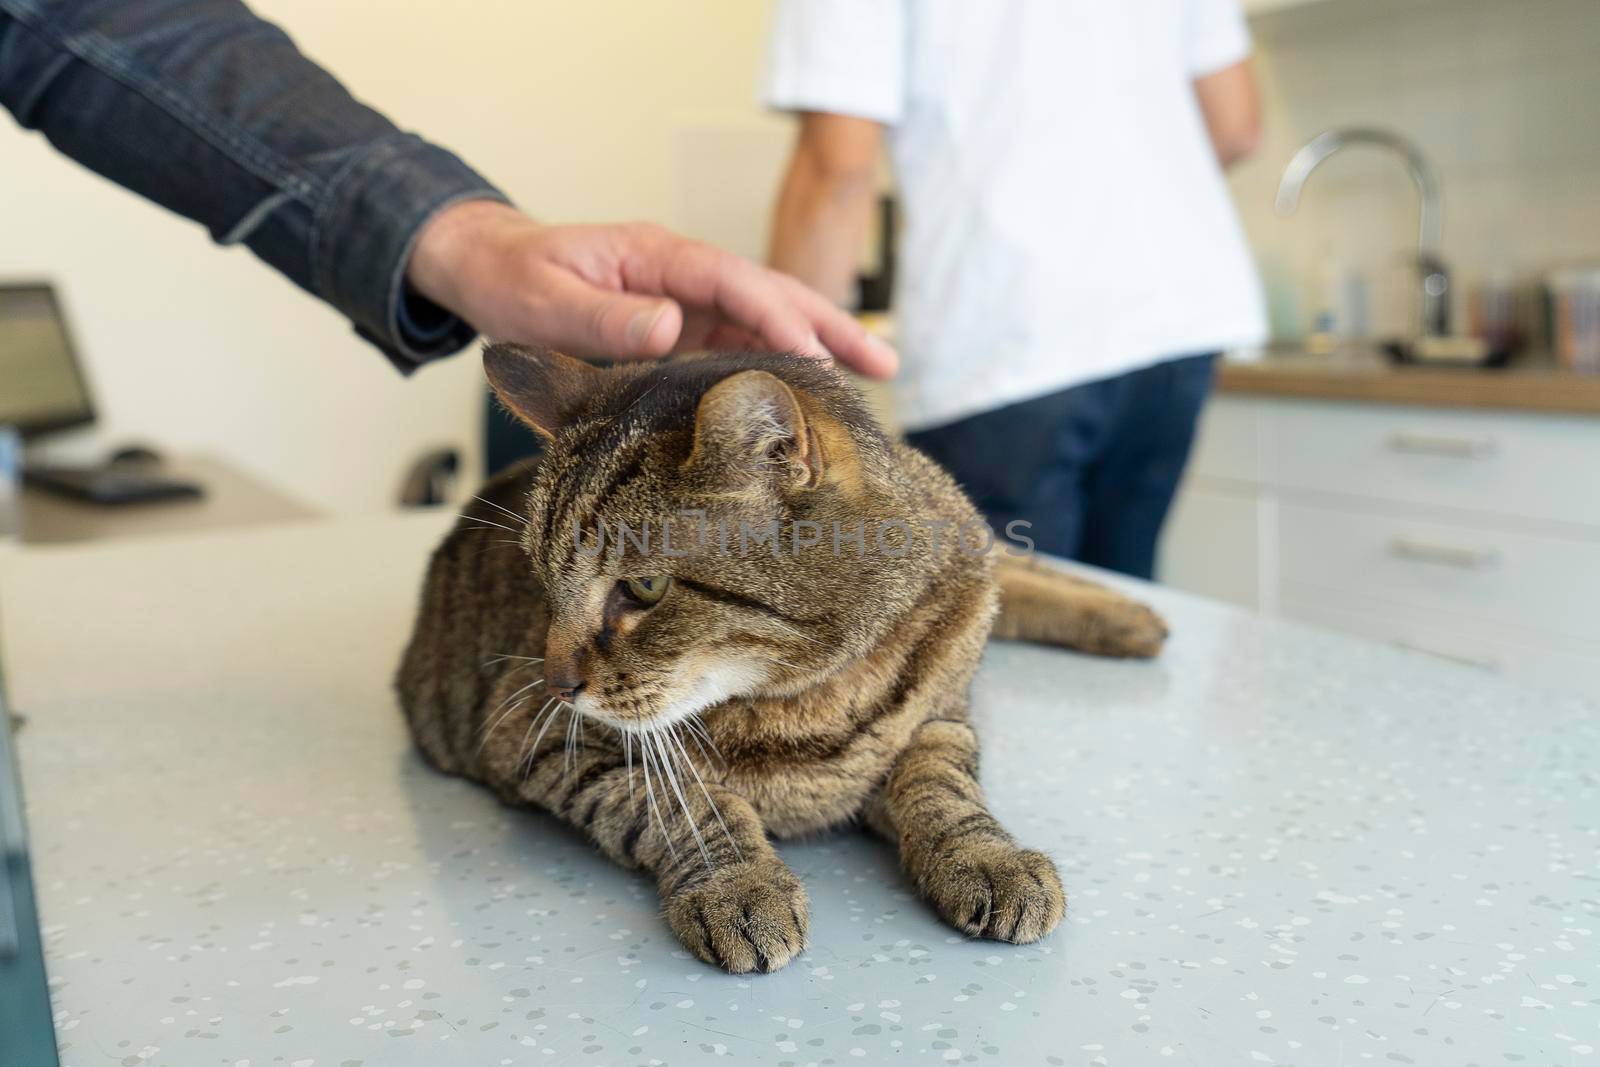 Tabby cat being caressed and comforted by his owner at the clinic with an unrecognizable veterinarian in the background by LeoniekvanderVliet